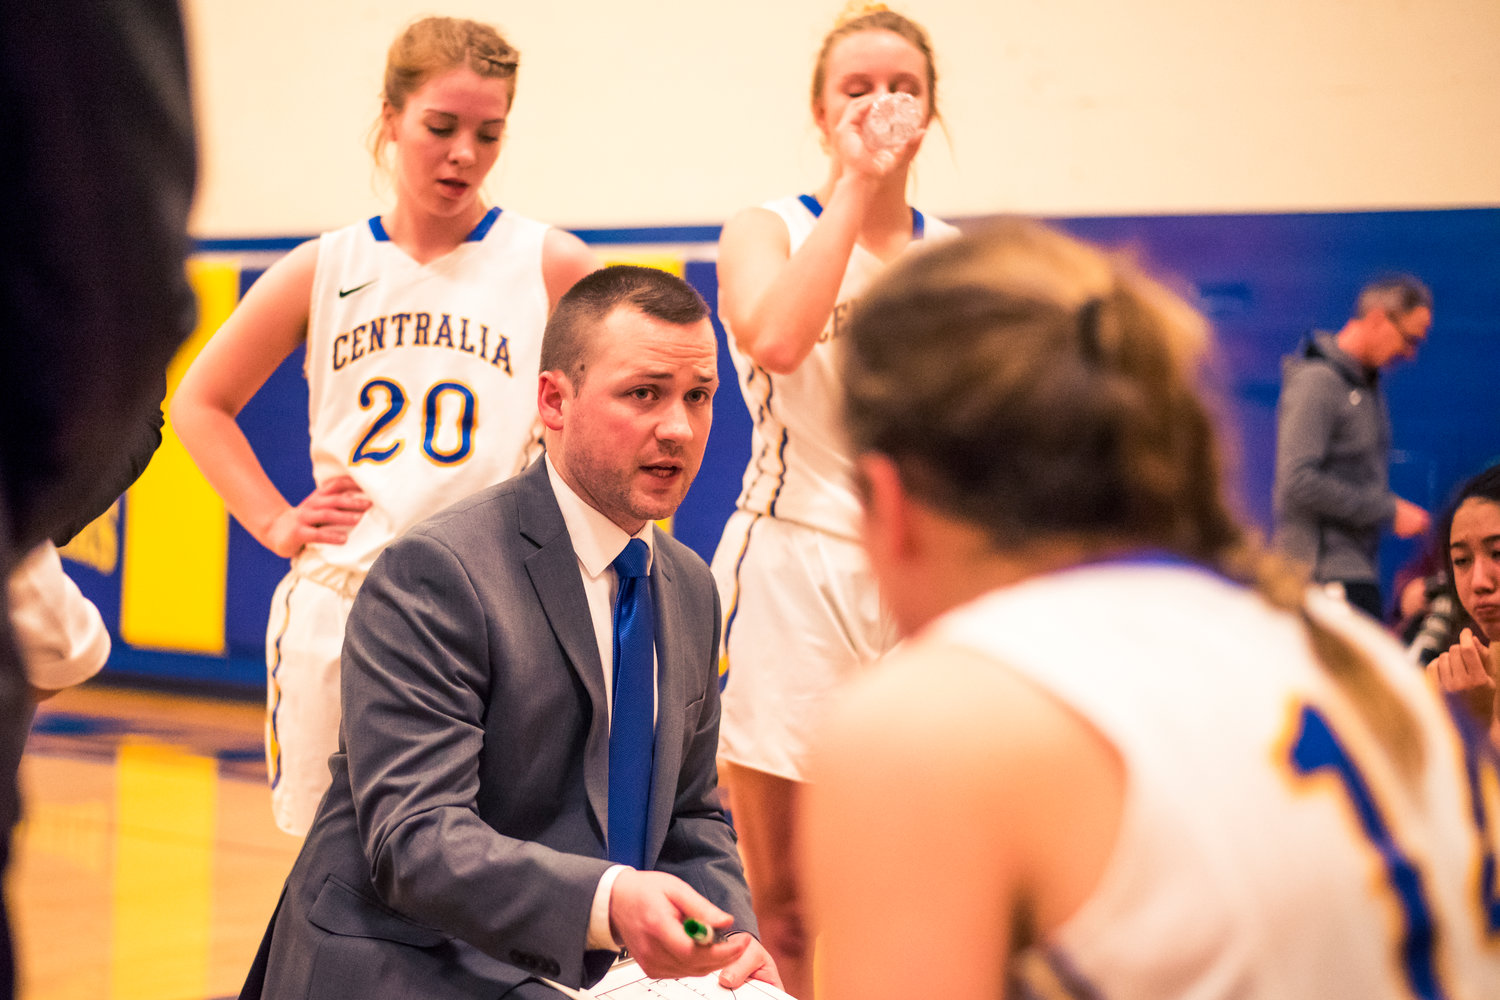 Centralia's coach Caleb Sells talks to players during a game against Grays Harbor Wednesday night at Centralia College.